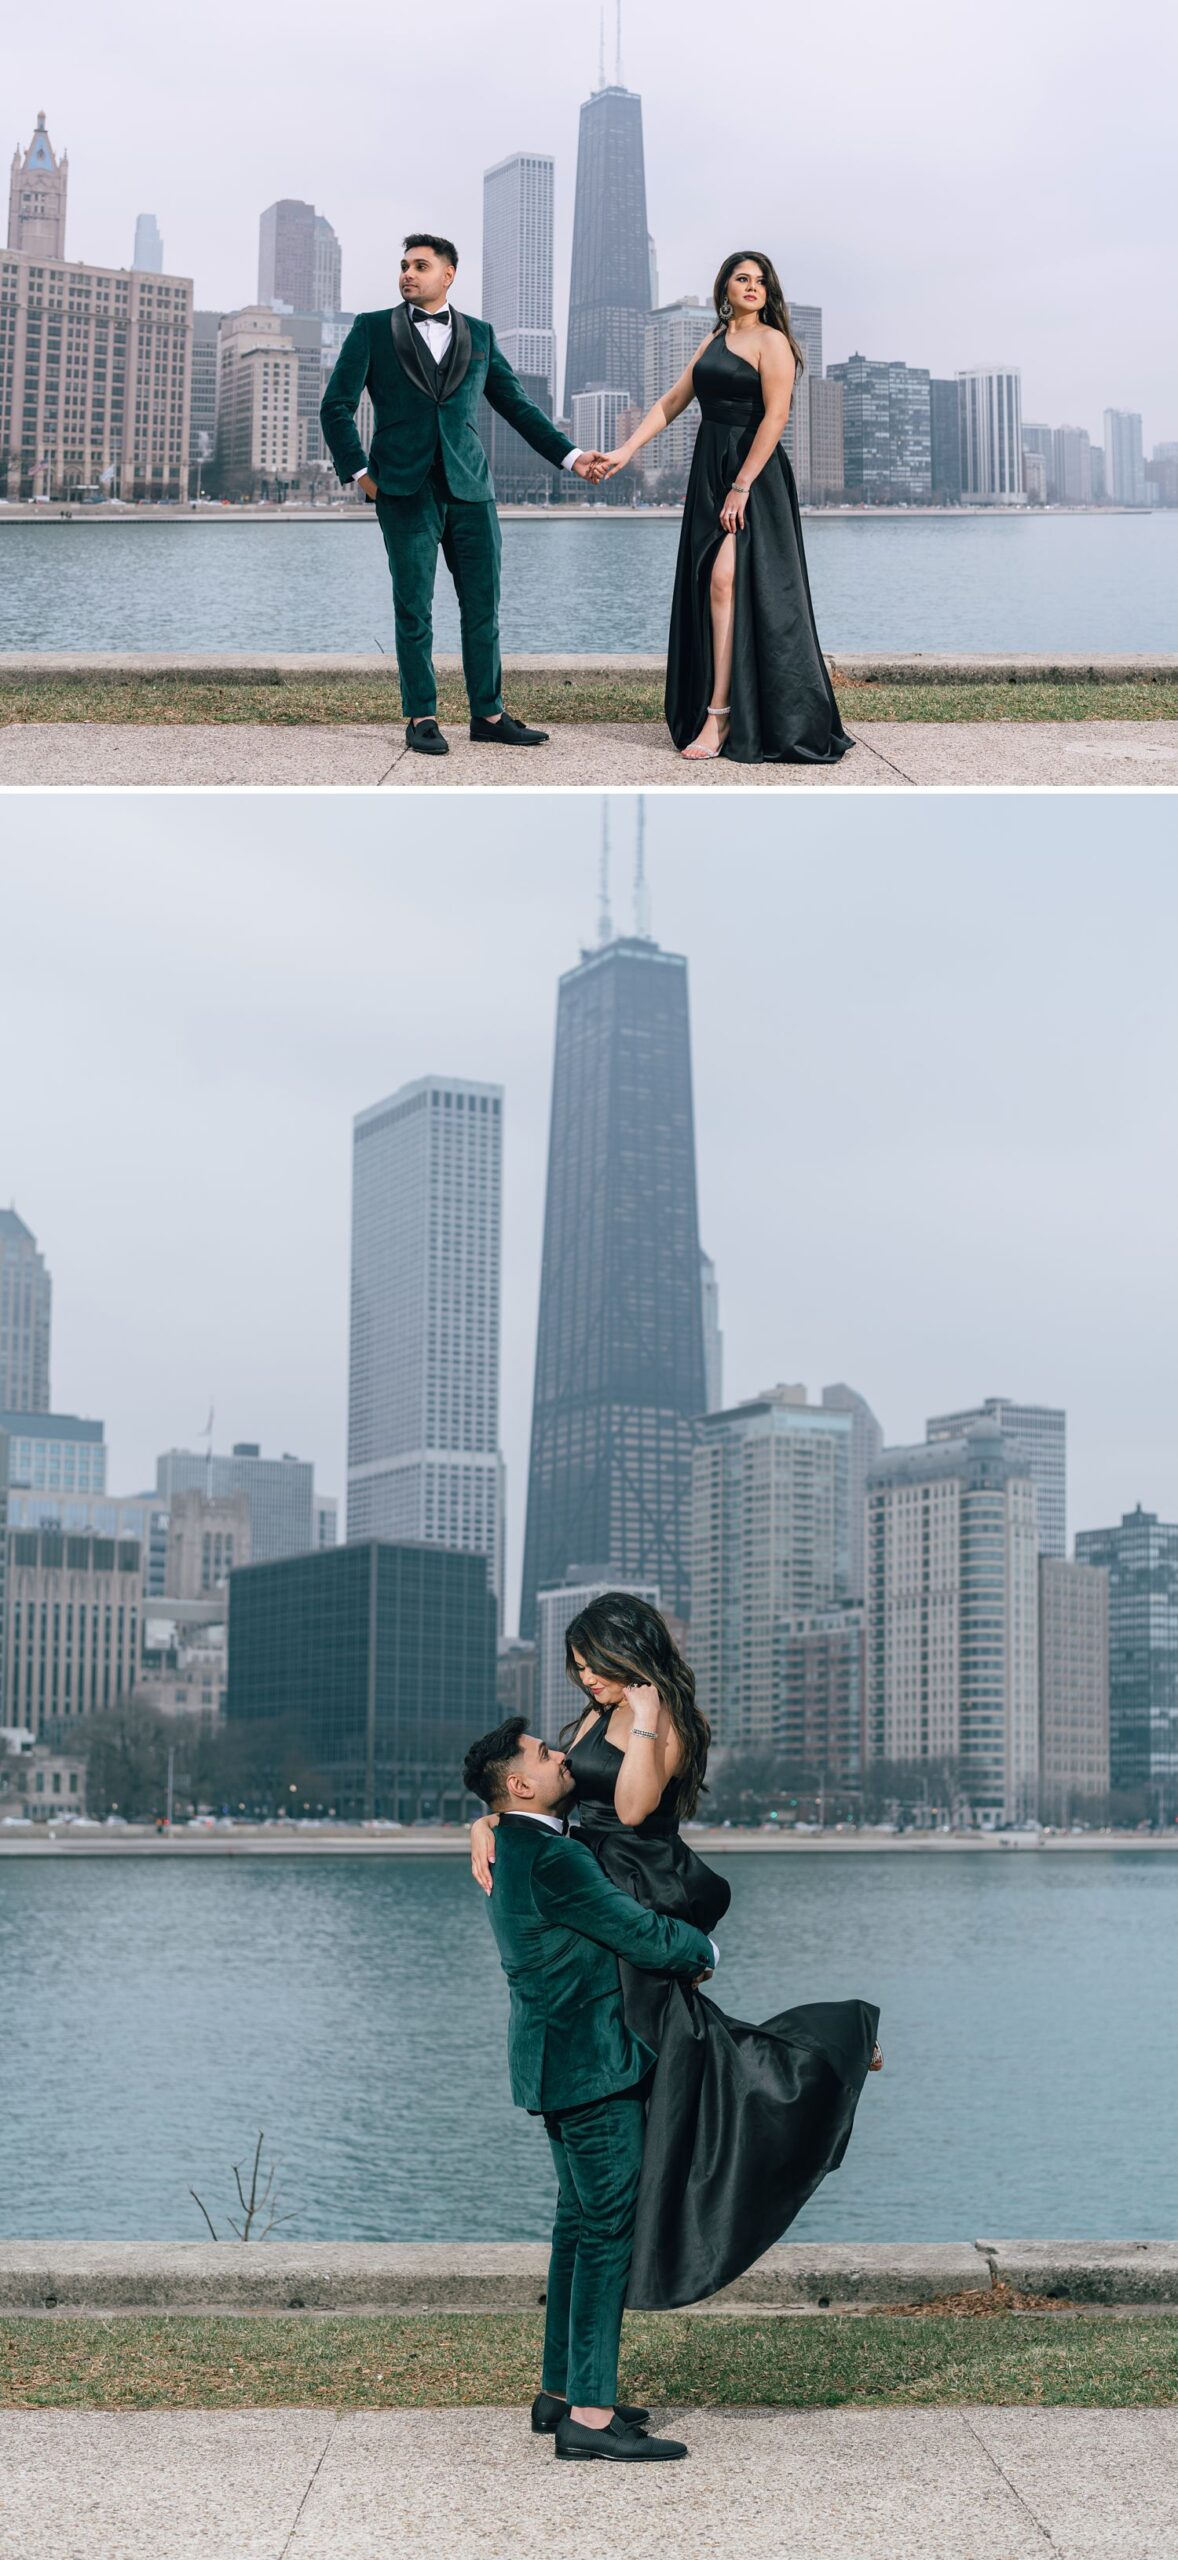 Chicago Skyline winter engagement photos photographed by Maha Studios